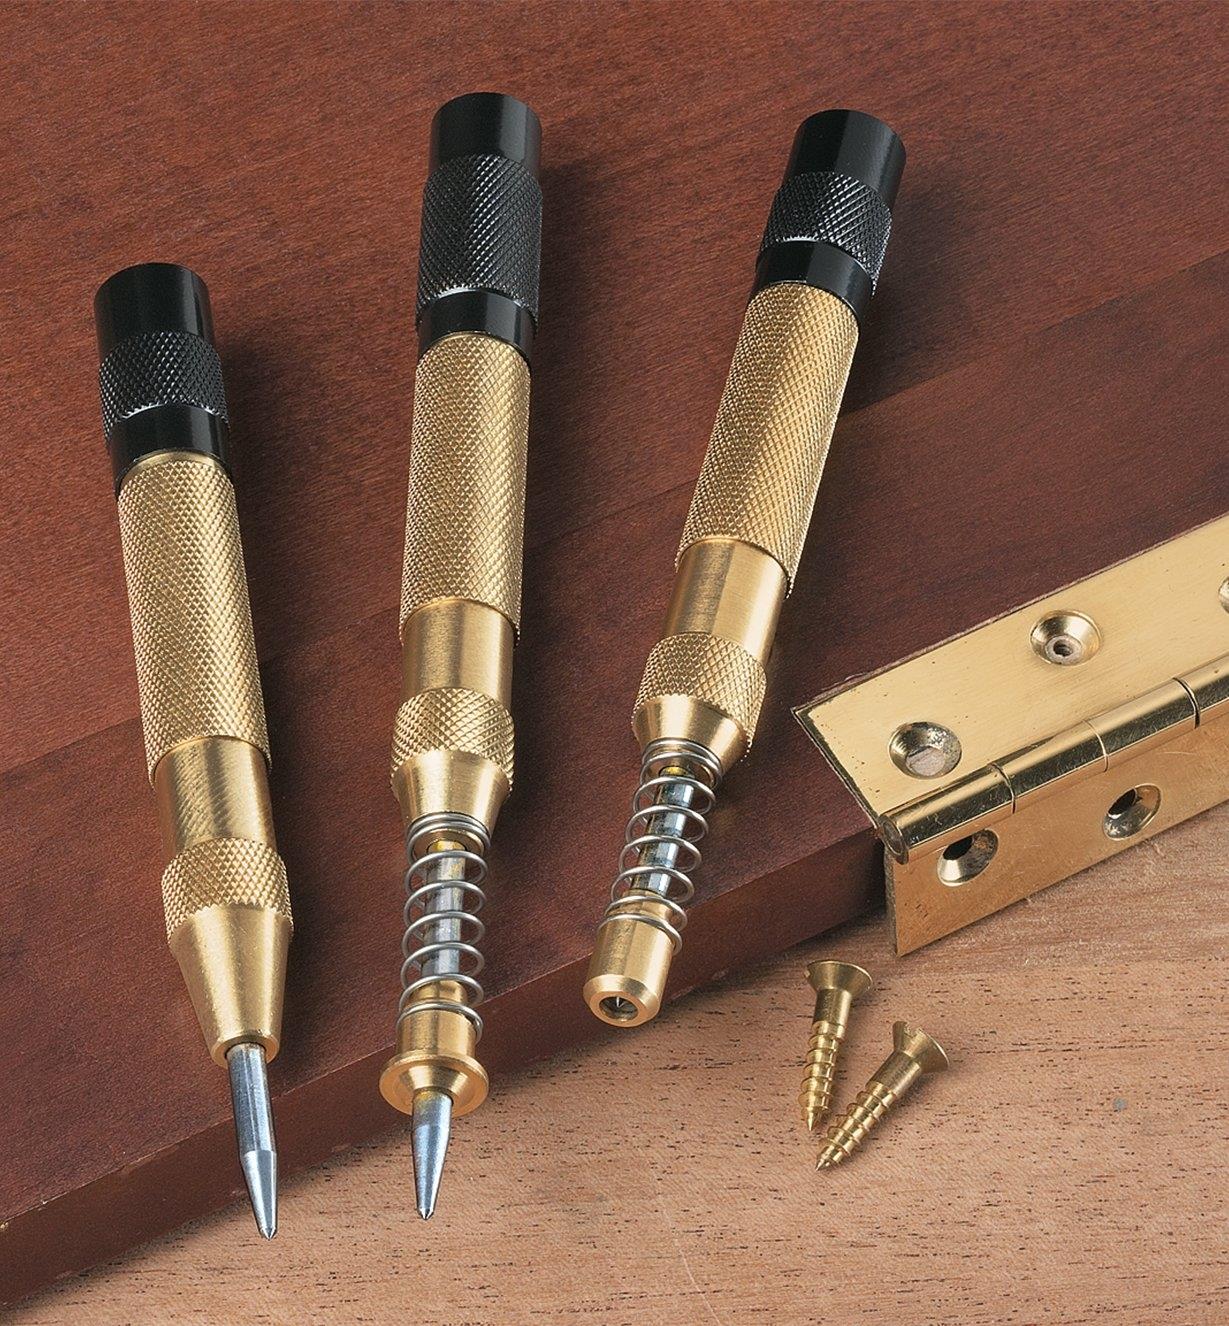 Set of 3 Punches lying on a door with a hinge that is about to be installed